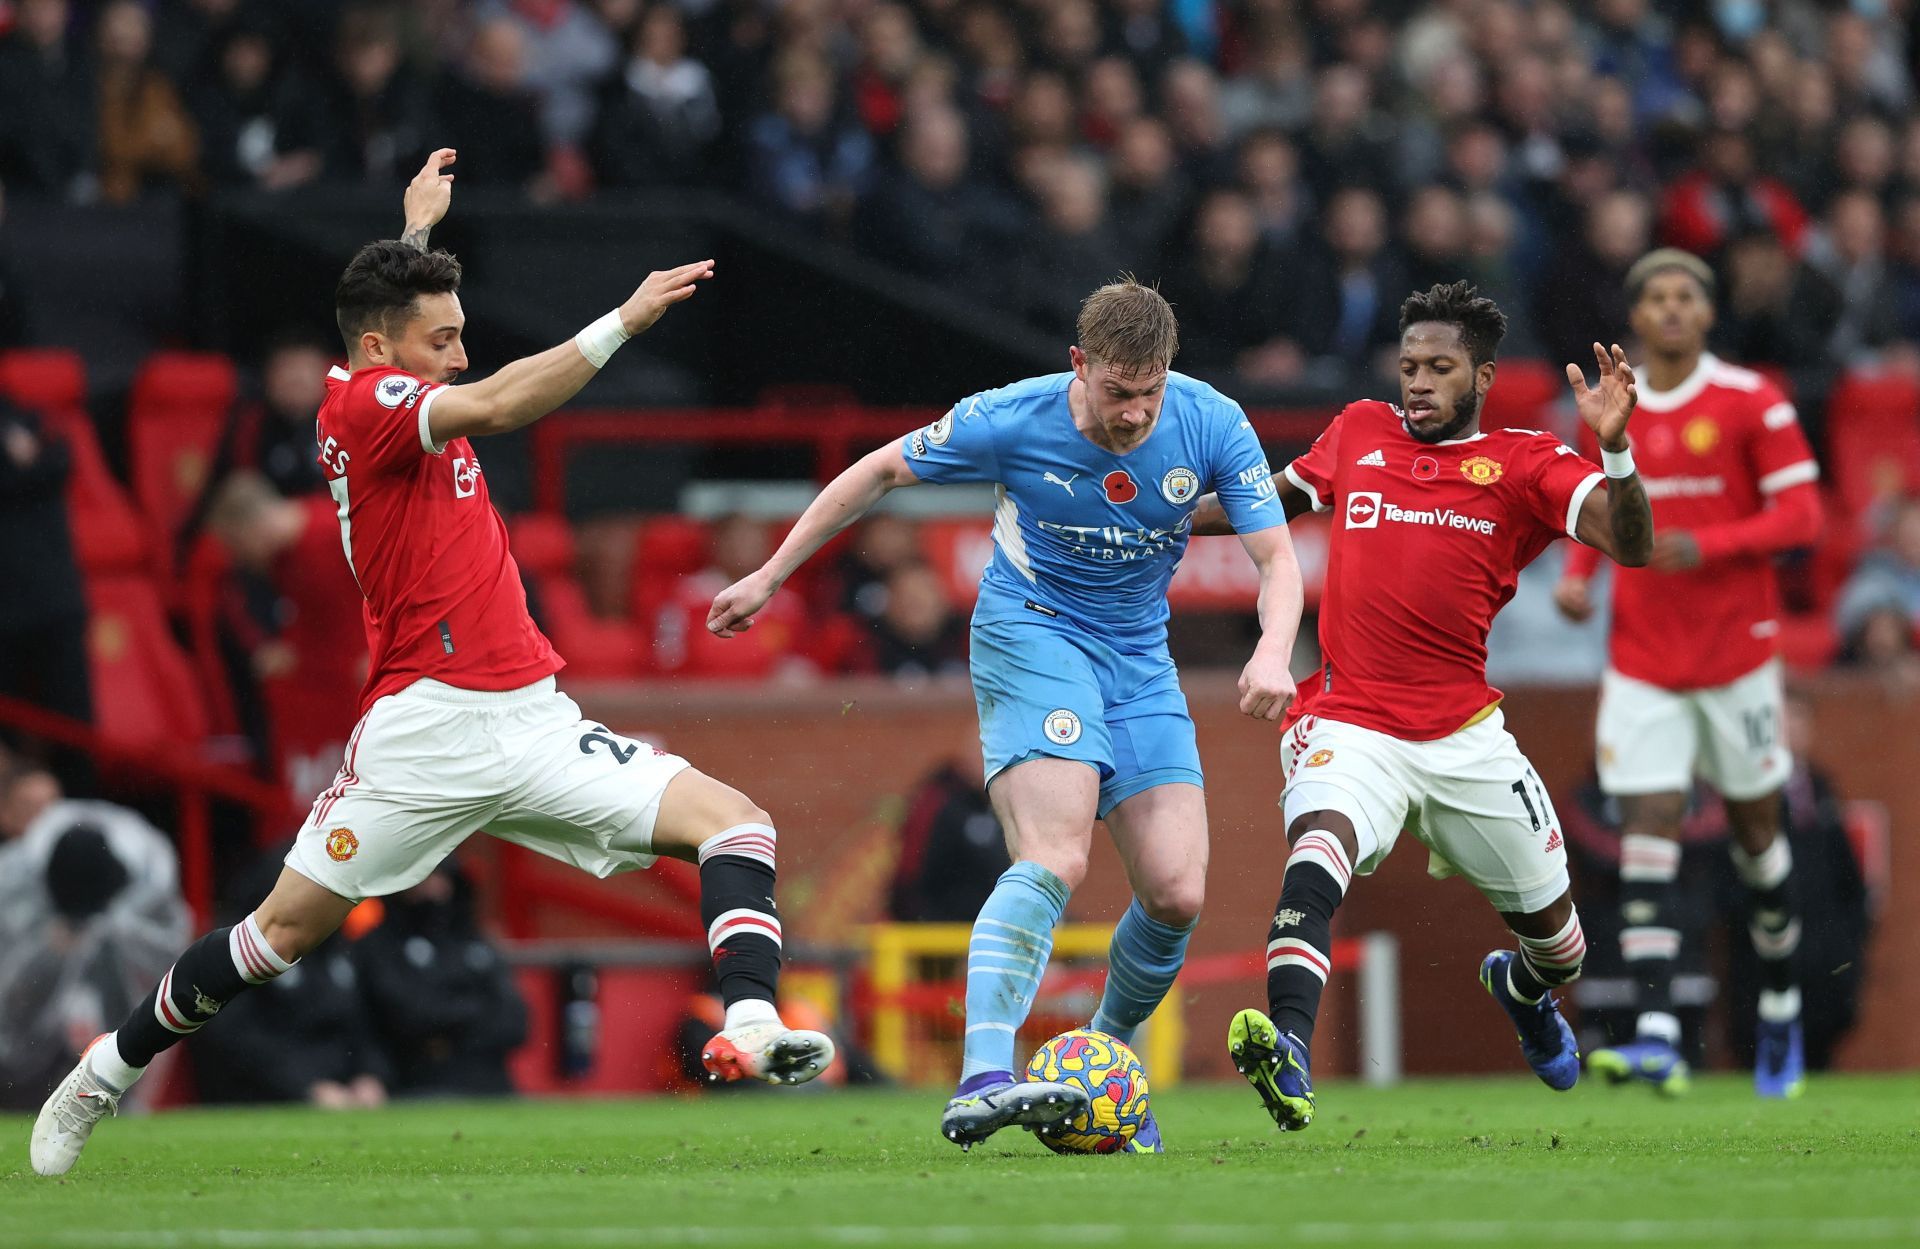 Manchester United take on Manchester City this weekend